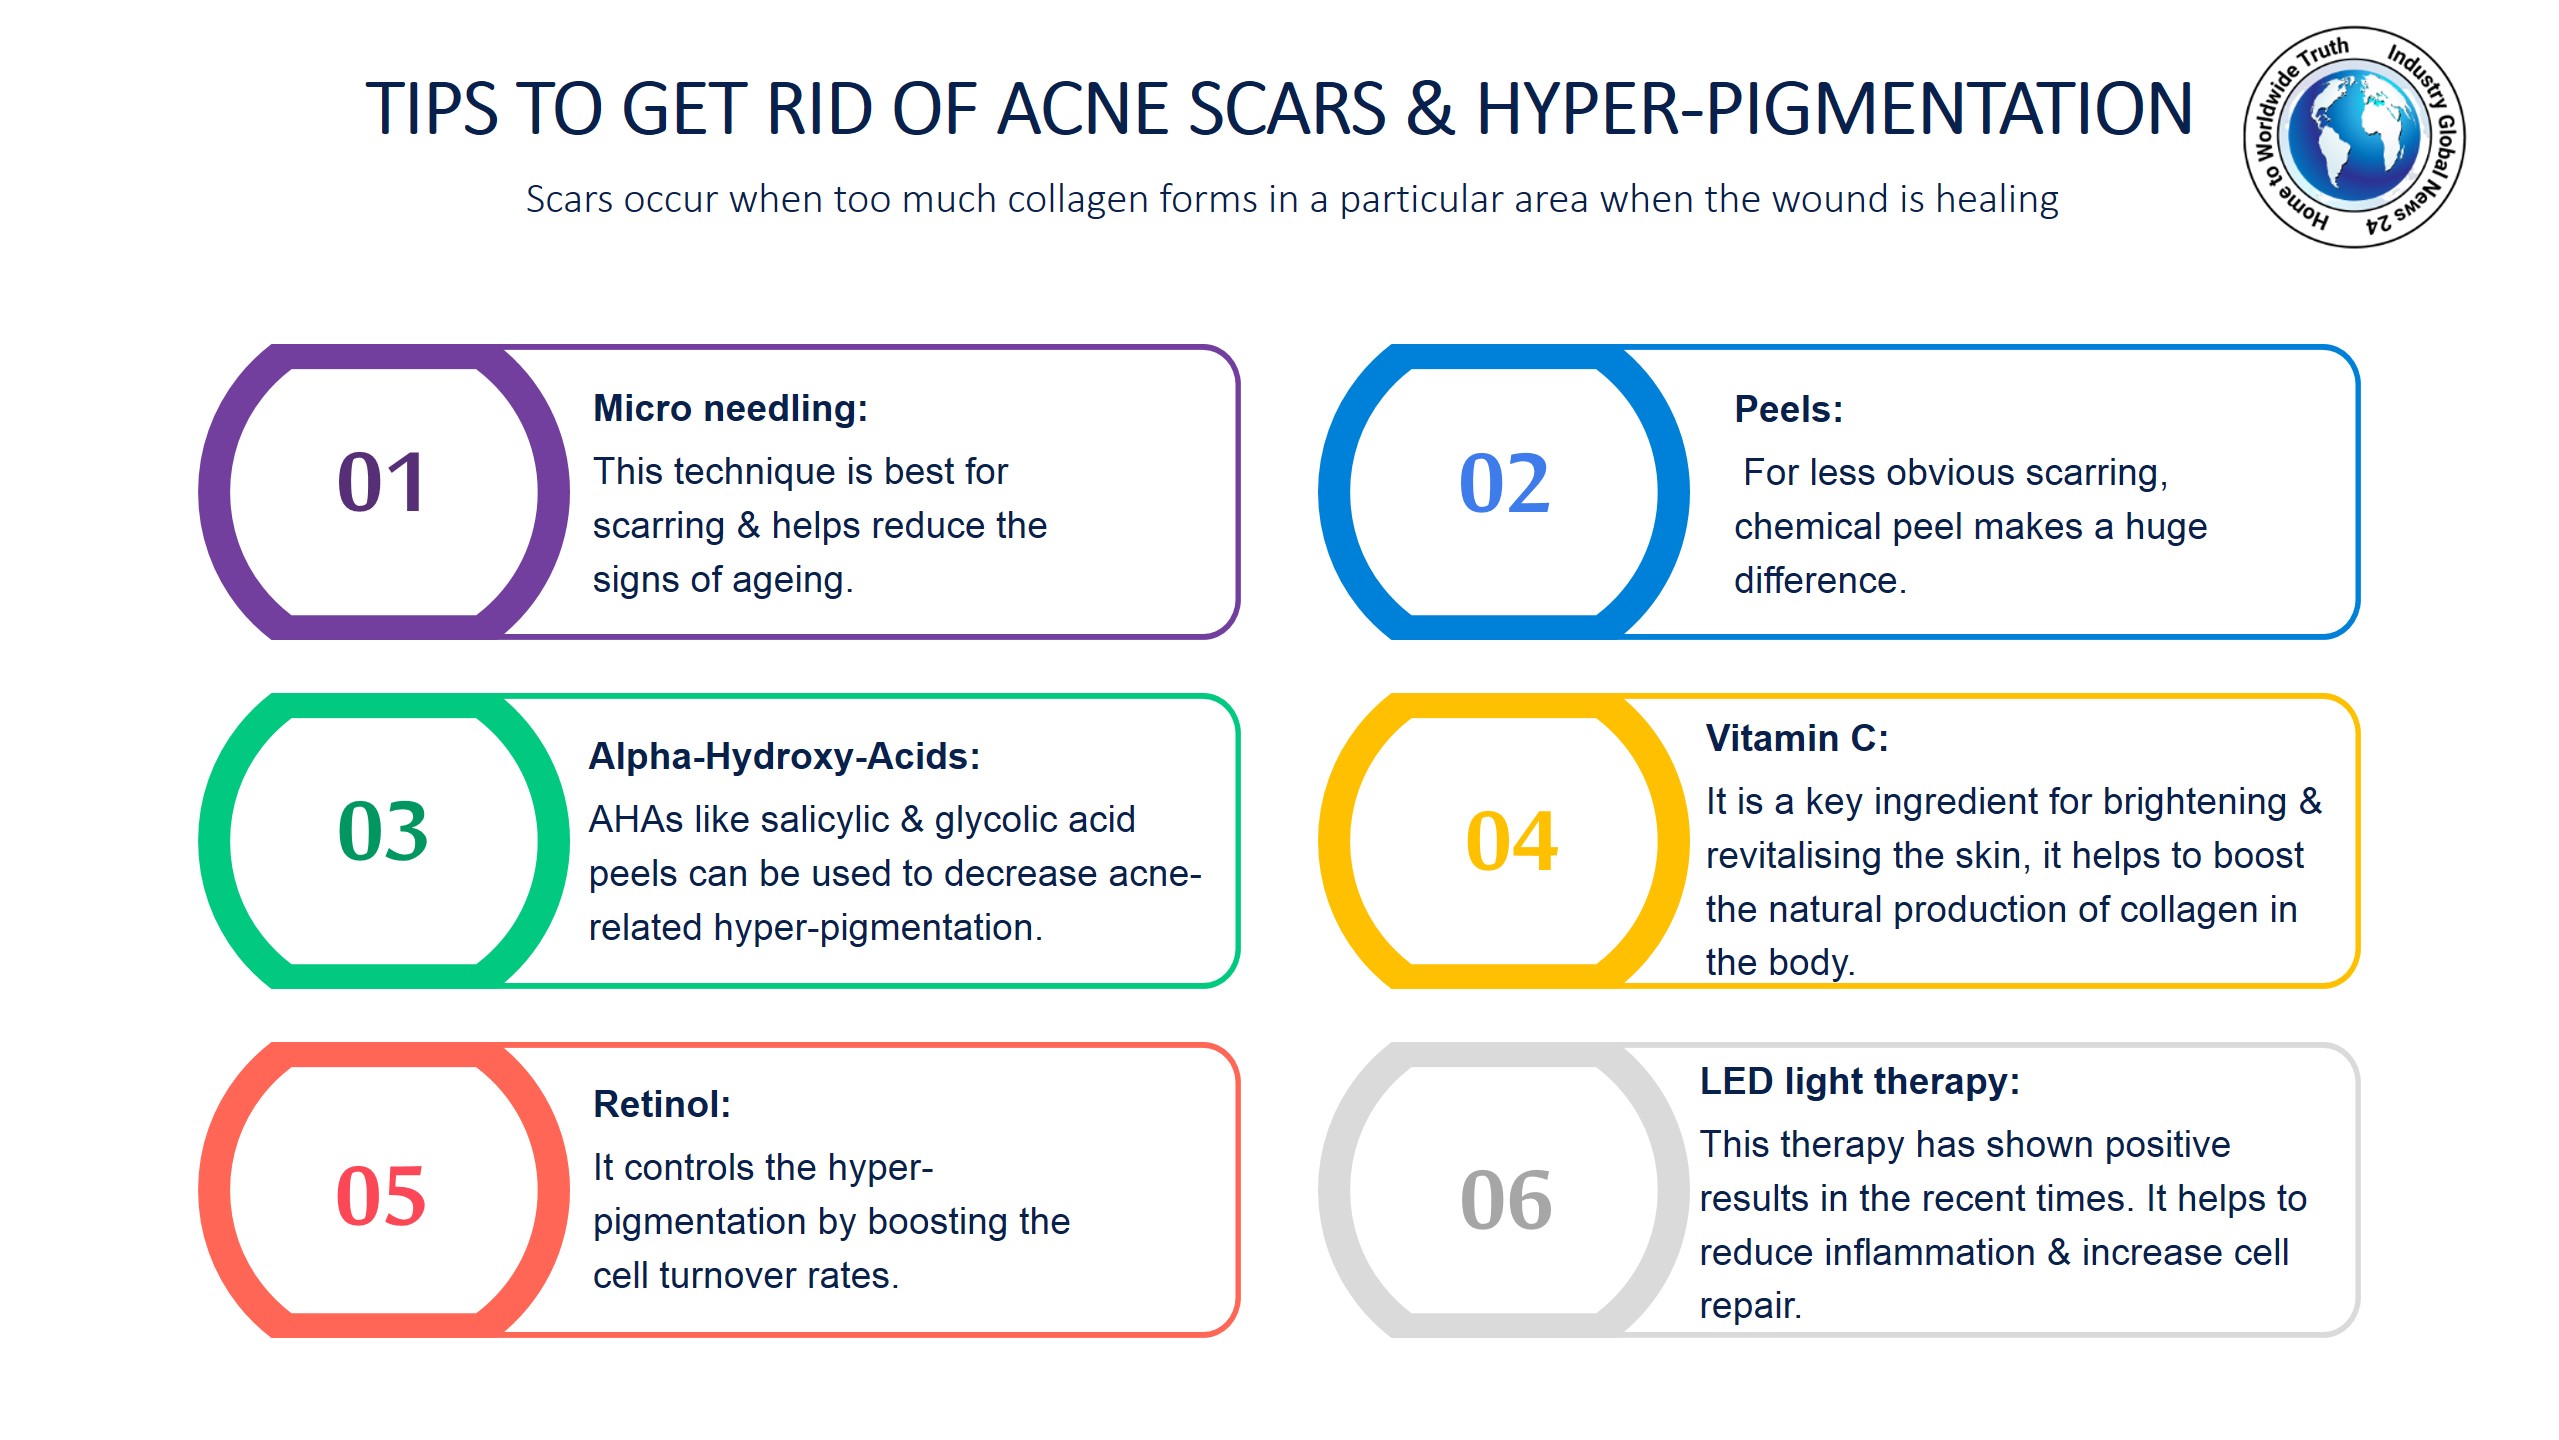 Tips to get rid of acne scars & hyper-pigmentation